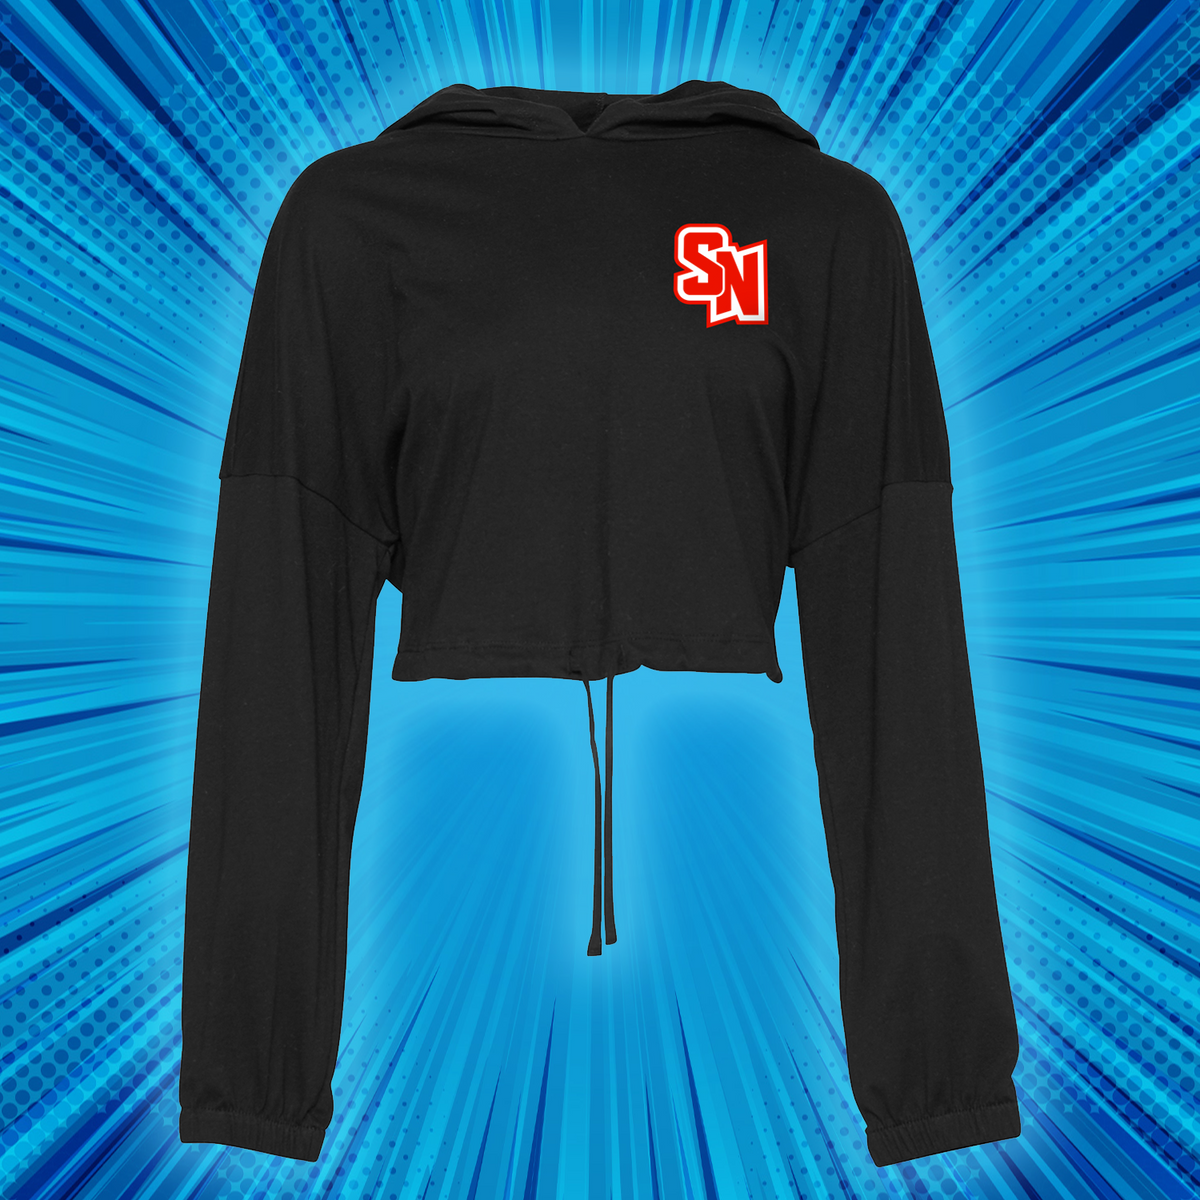 Spy Ninjas Ladies Cropped Lightweight Hoodie with Front and Back Logos - Black